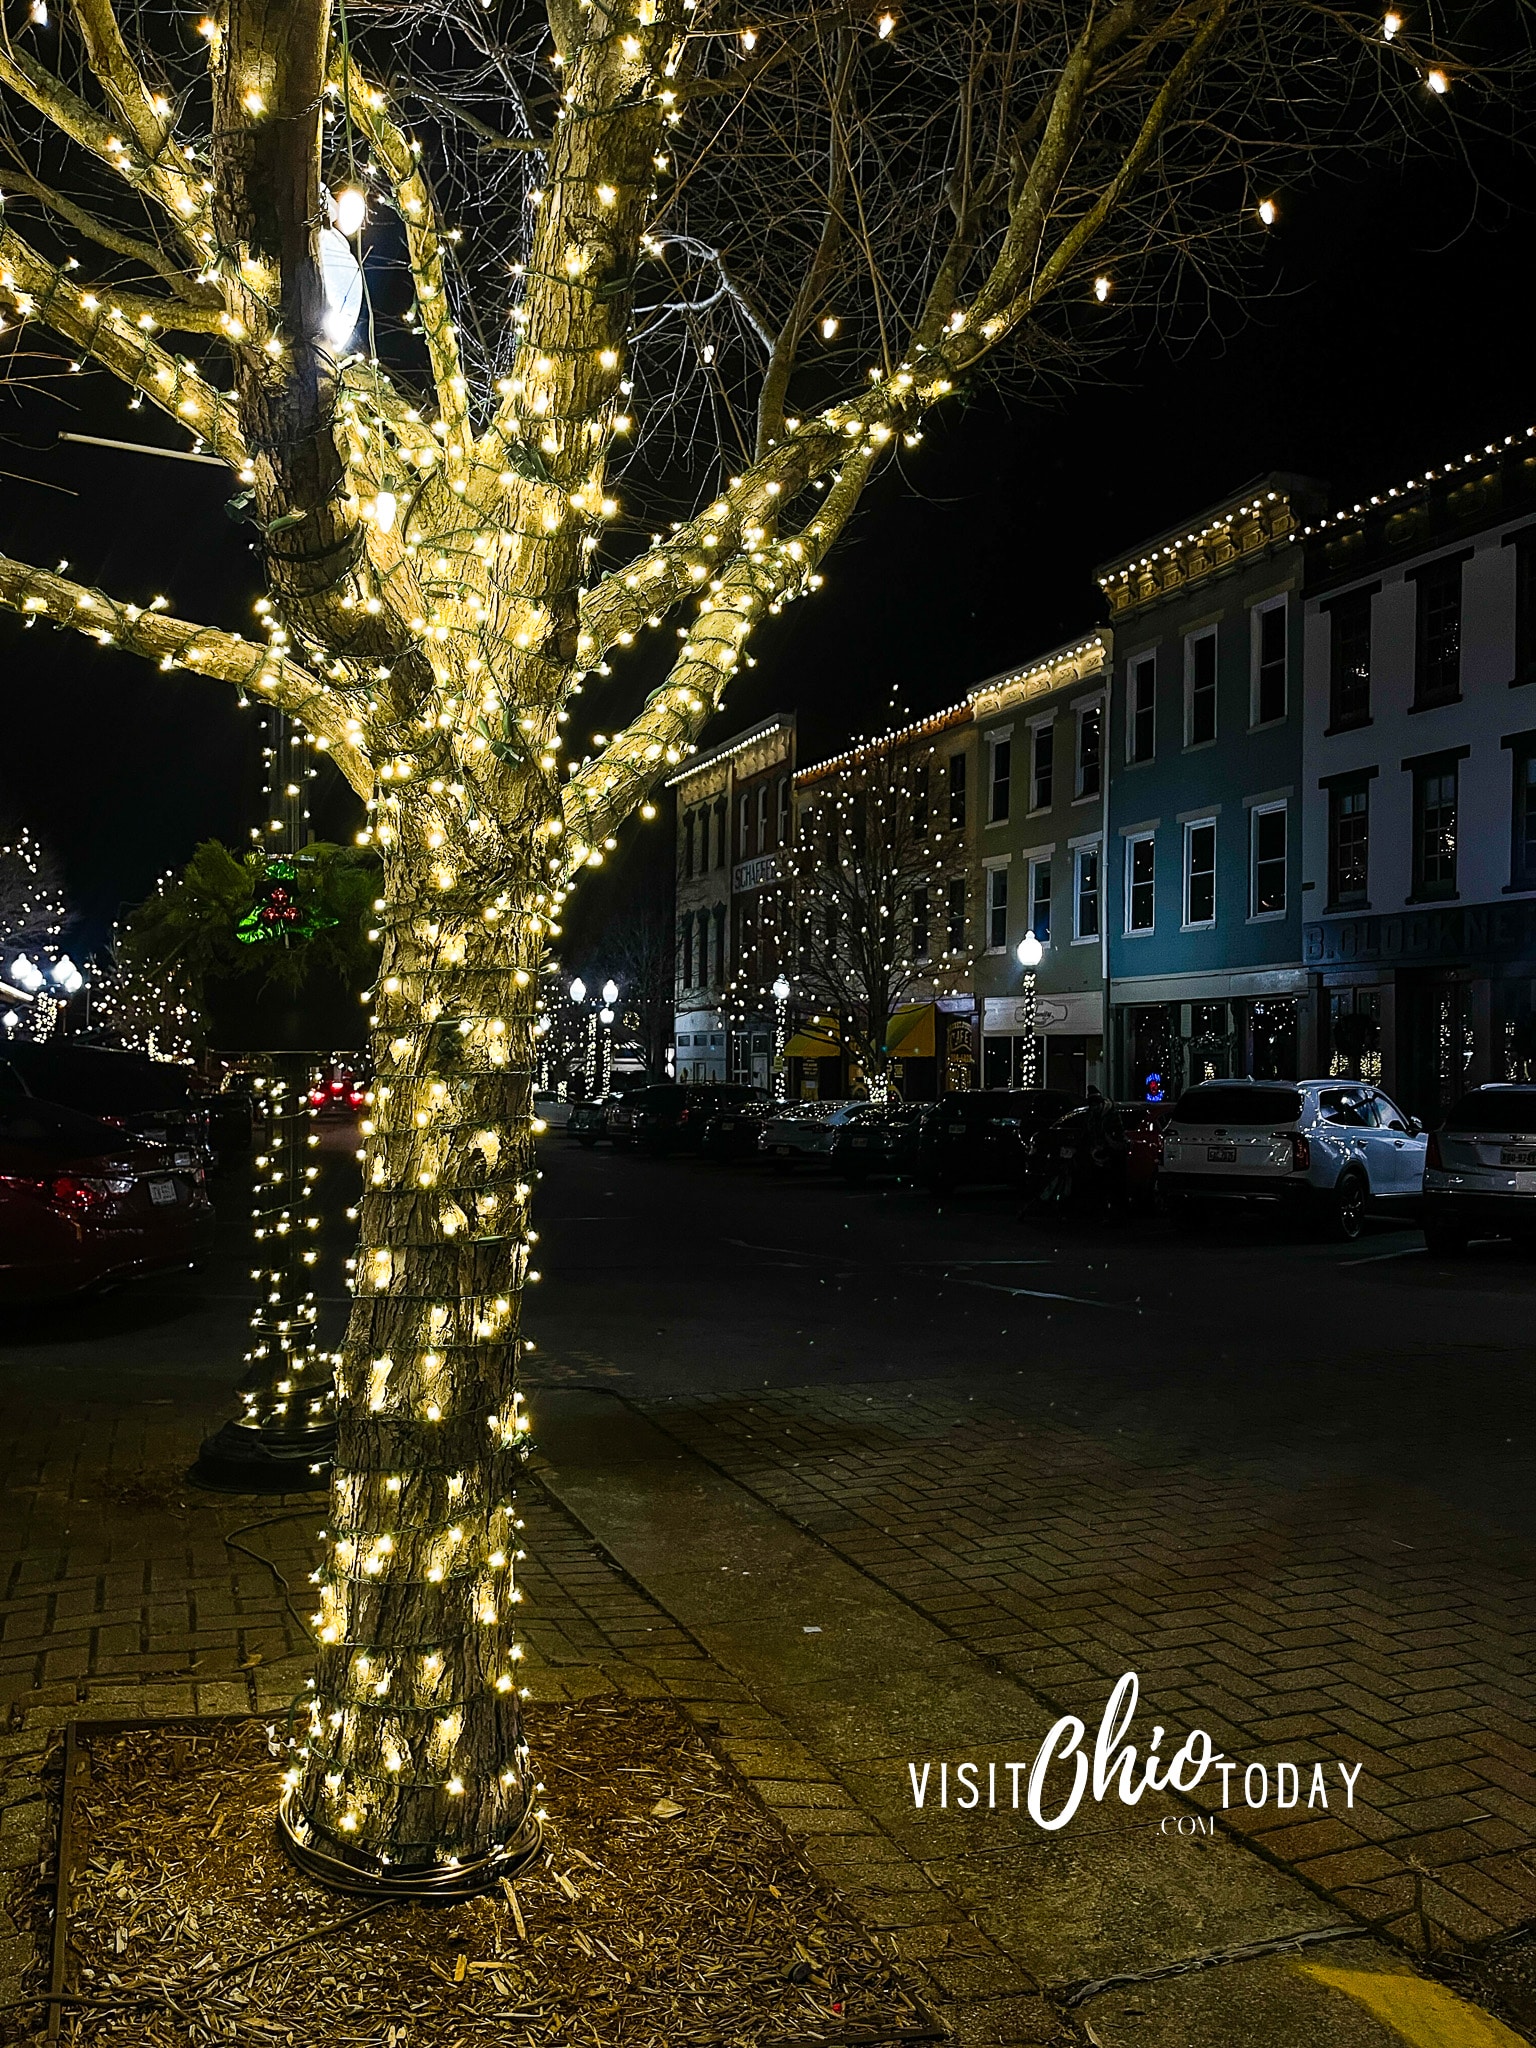 view at night of a small town stree that has store lights on and trees are decorated with christmas lights